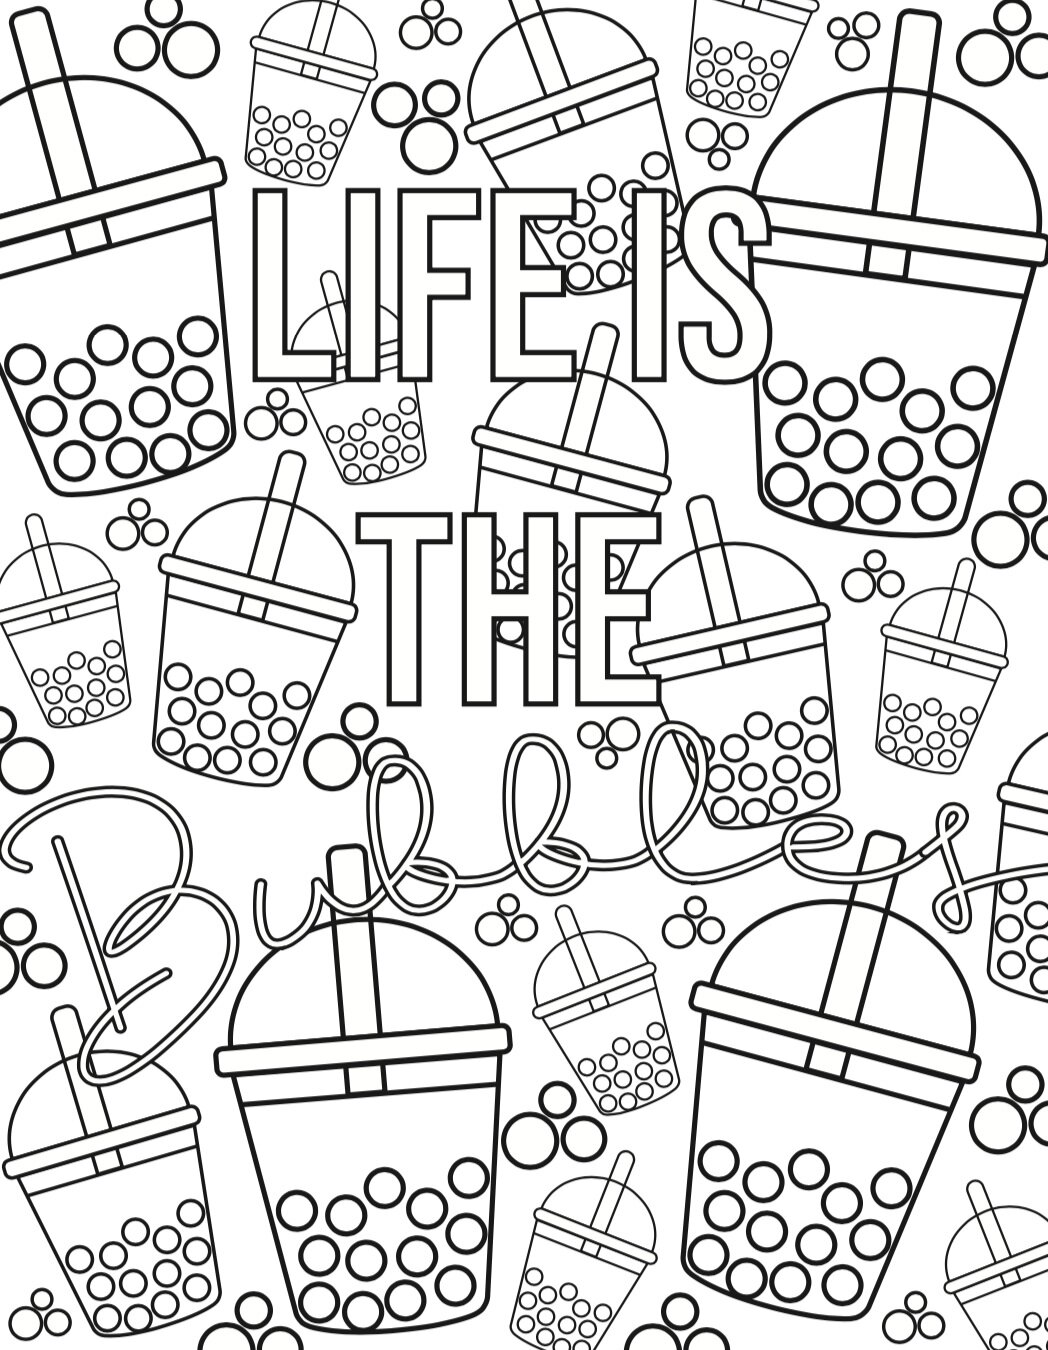 FREE DOWNLOAD- Bubble Tea Colouring Page — Crafternoon